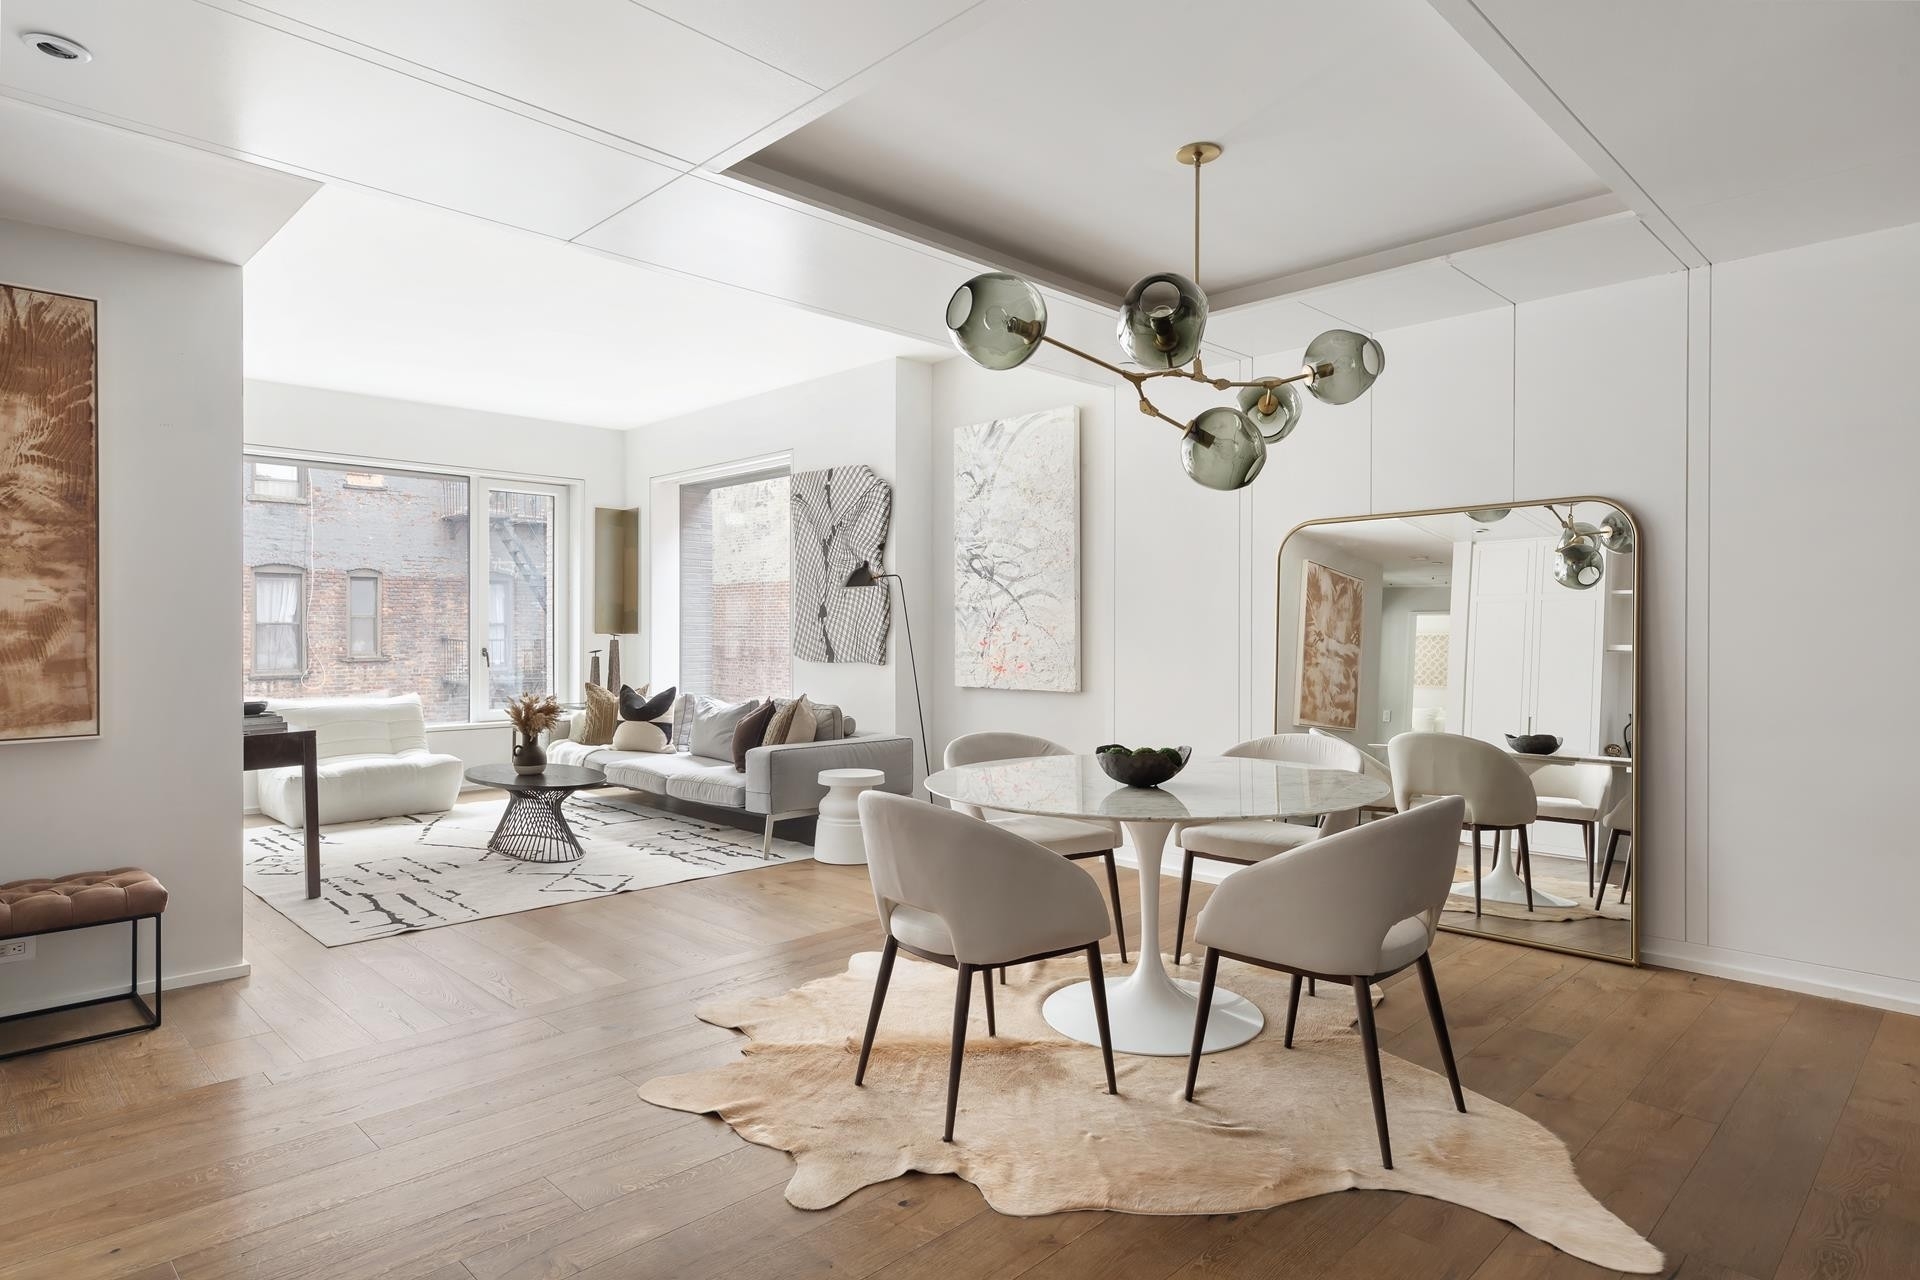 Condominium for Sale at 345 Meatpacking, 345 W 14TH ST, 5C Chelsea, New York, New York 10014